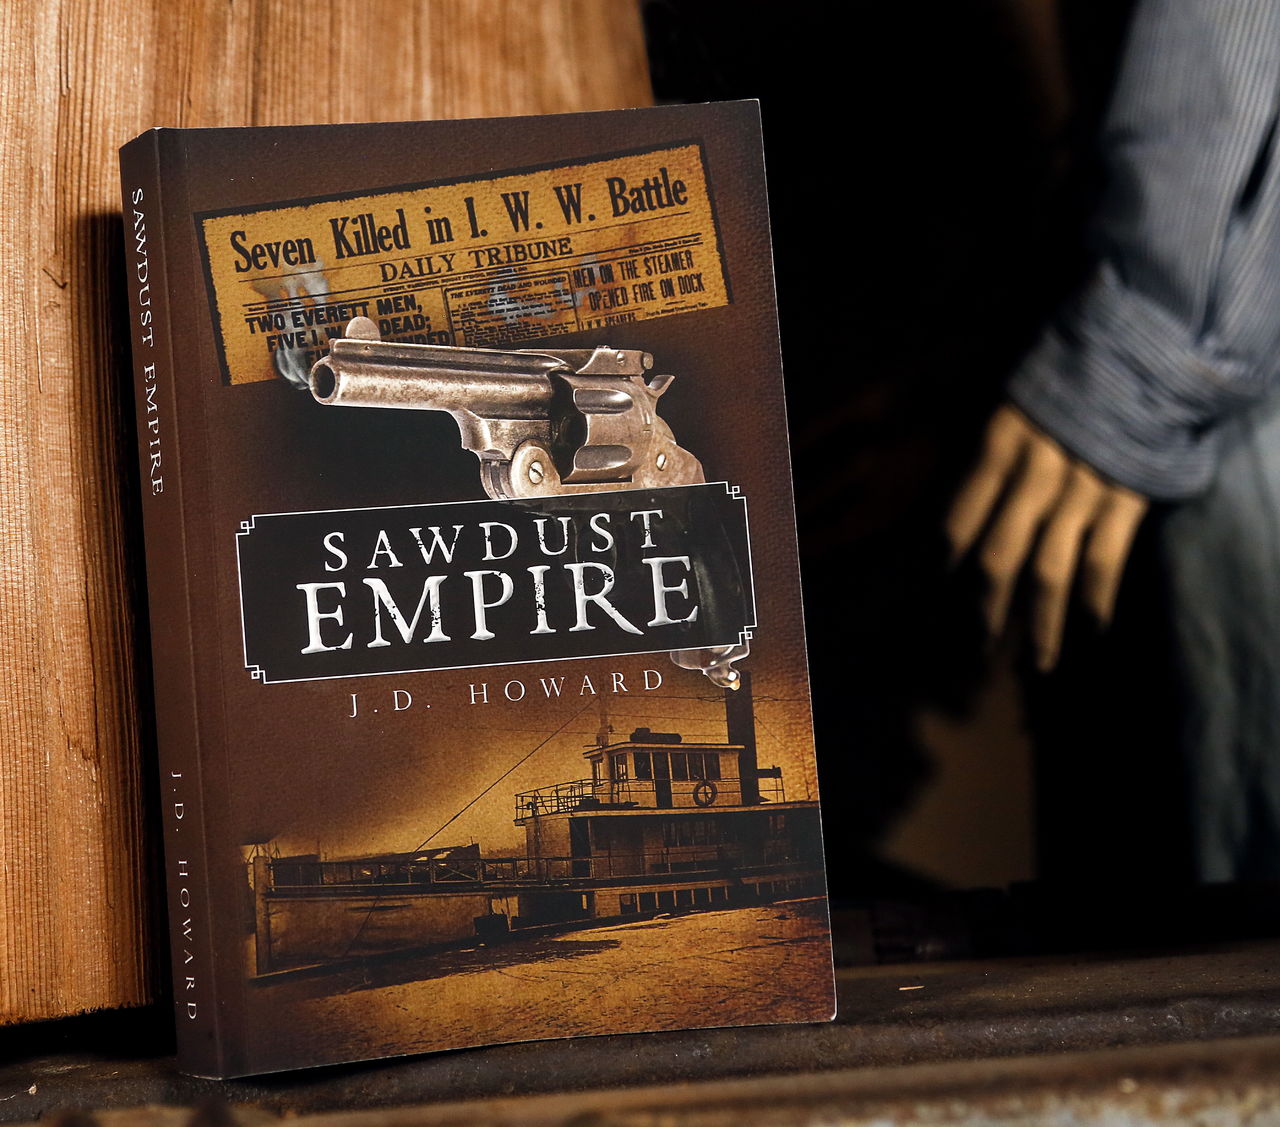 “Sawdust Empire” is a fictional account of the labor strife that fueled the 1916 Everett Massacre.